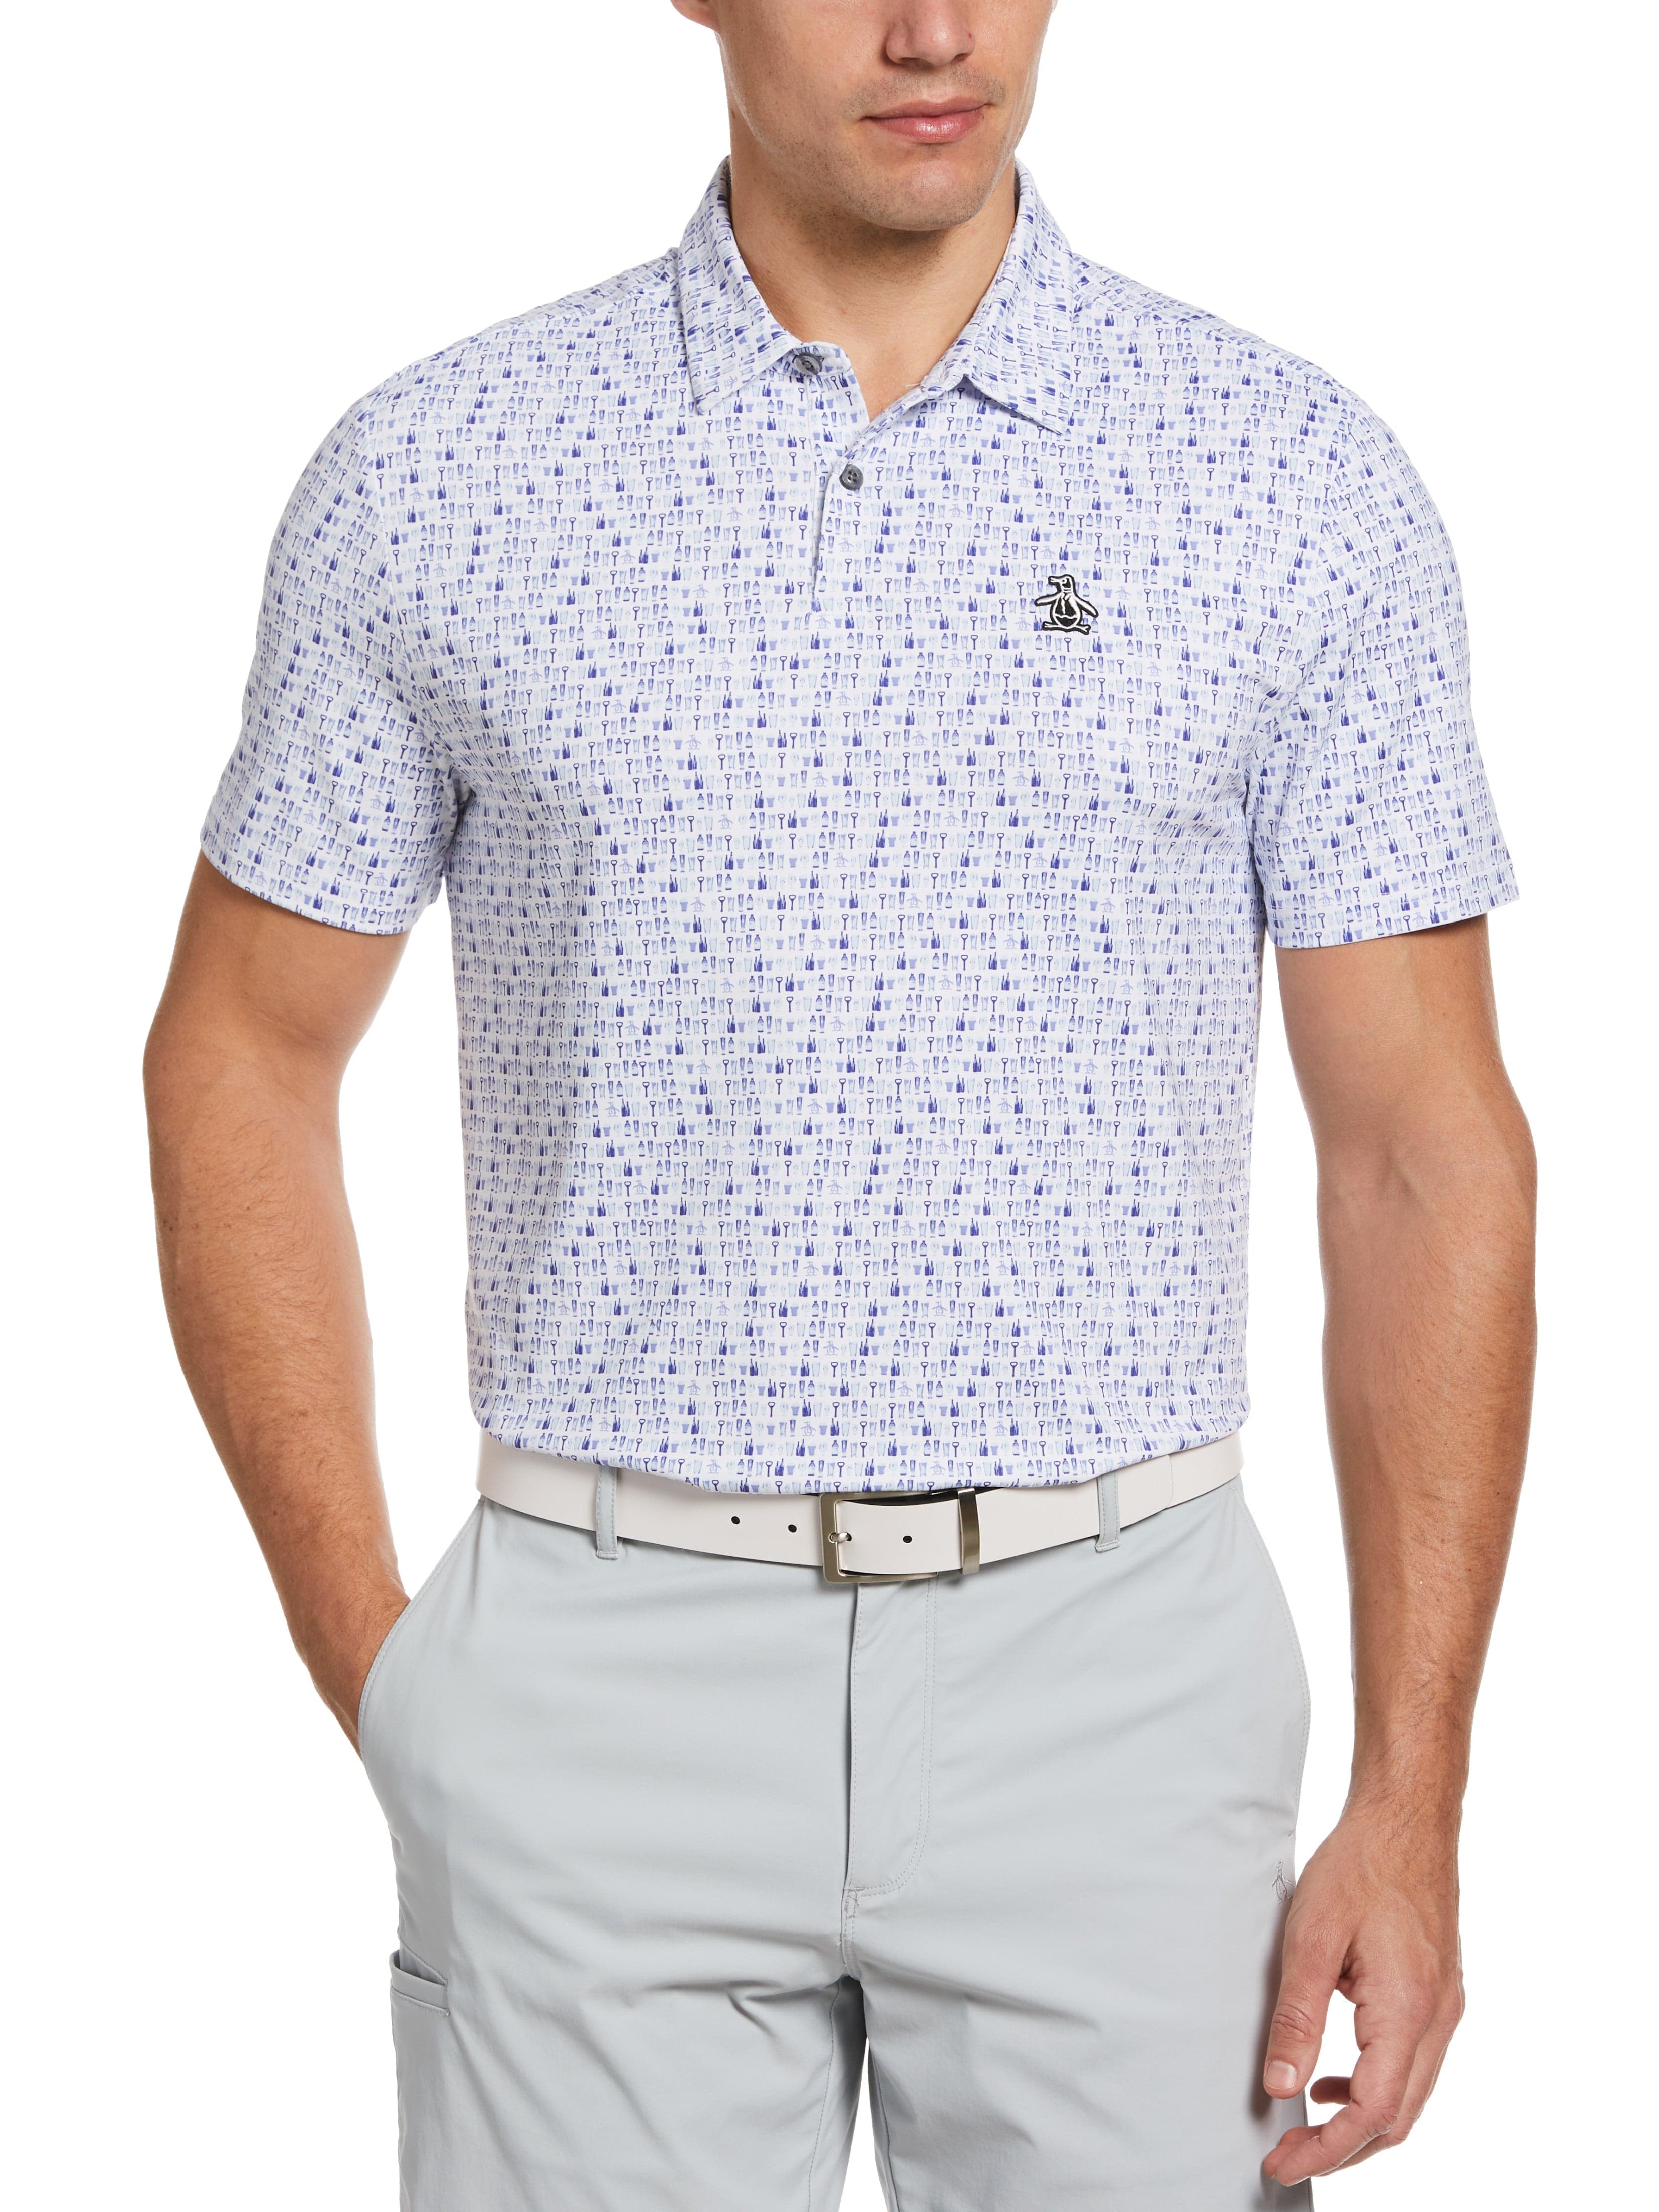 Original Penguin Mens Have a Beer Novelty Print Golf Polo Shirt, Size Small, Blueing, Polyester/Recycled Polyester/Elastane | Golf Apparel Shop